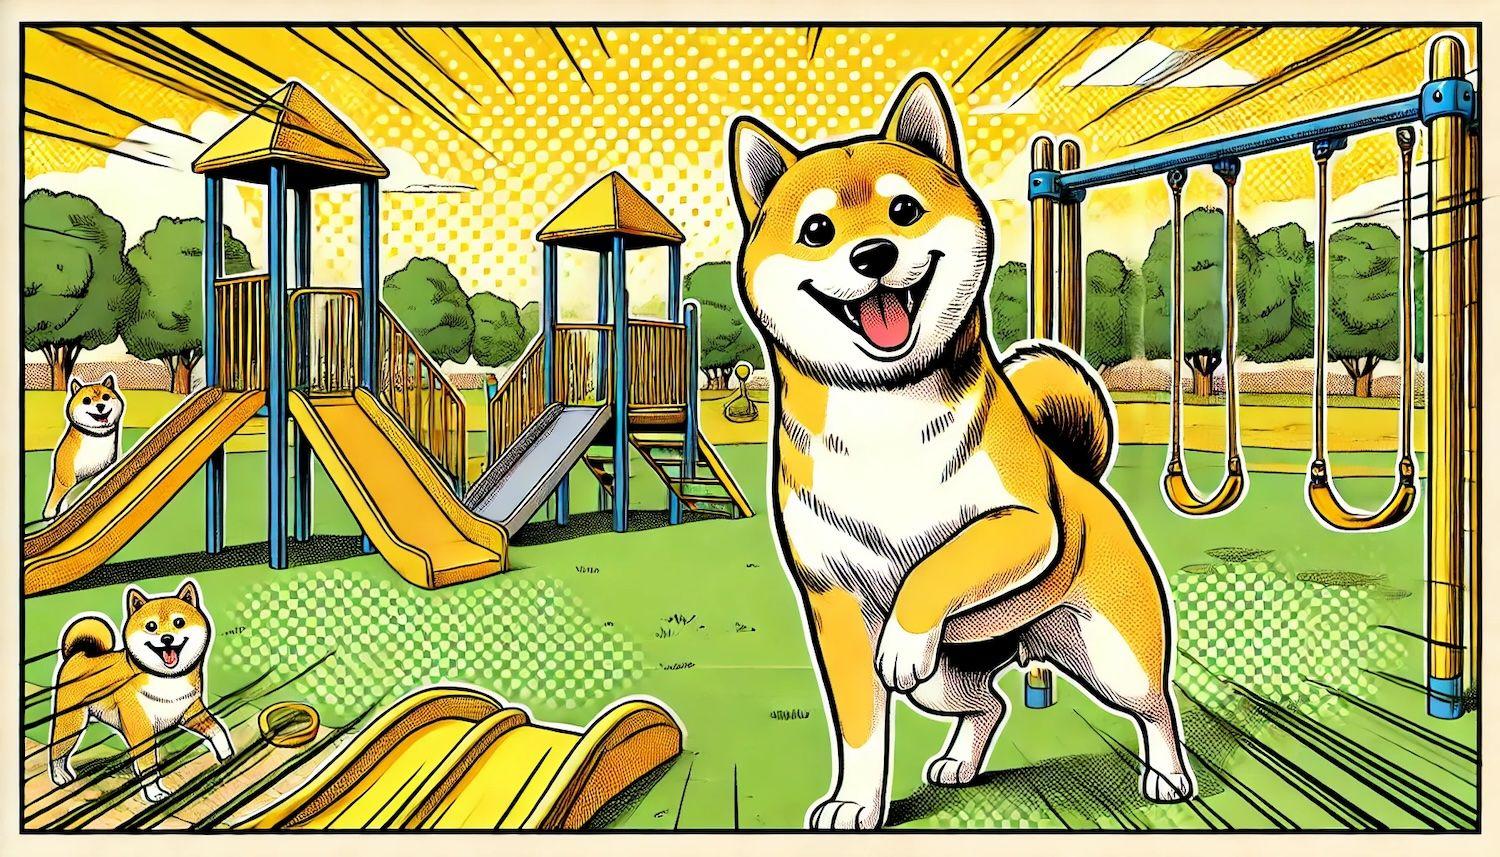 Shiba Inu Enters 'Buy Zone' Following Price Plunge, Says Analyst